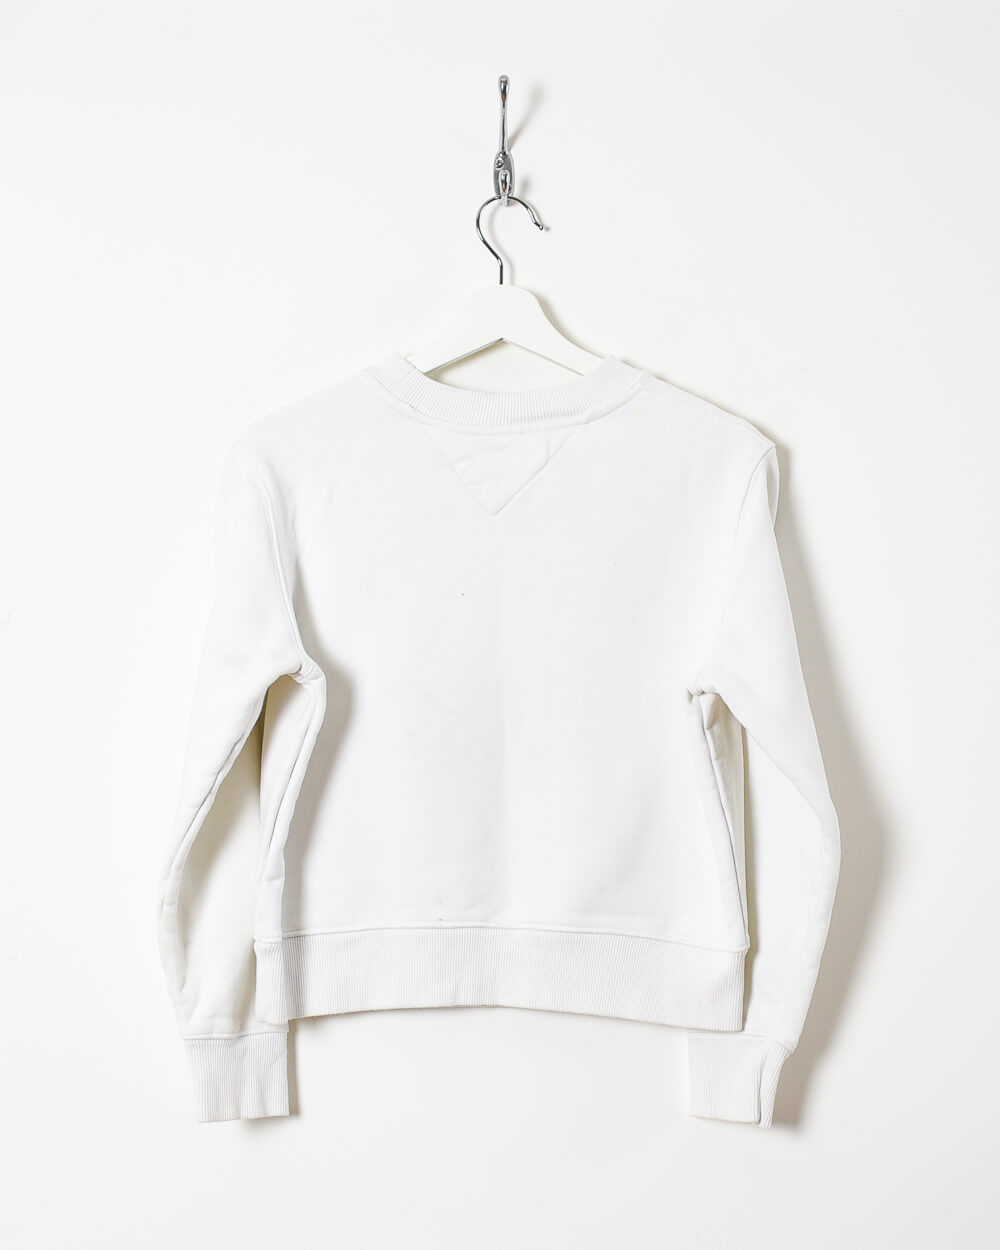 White Tommy Jeans Sweatshirt - X-Small